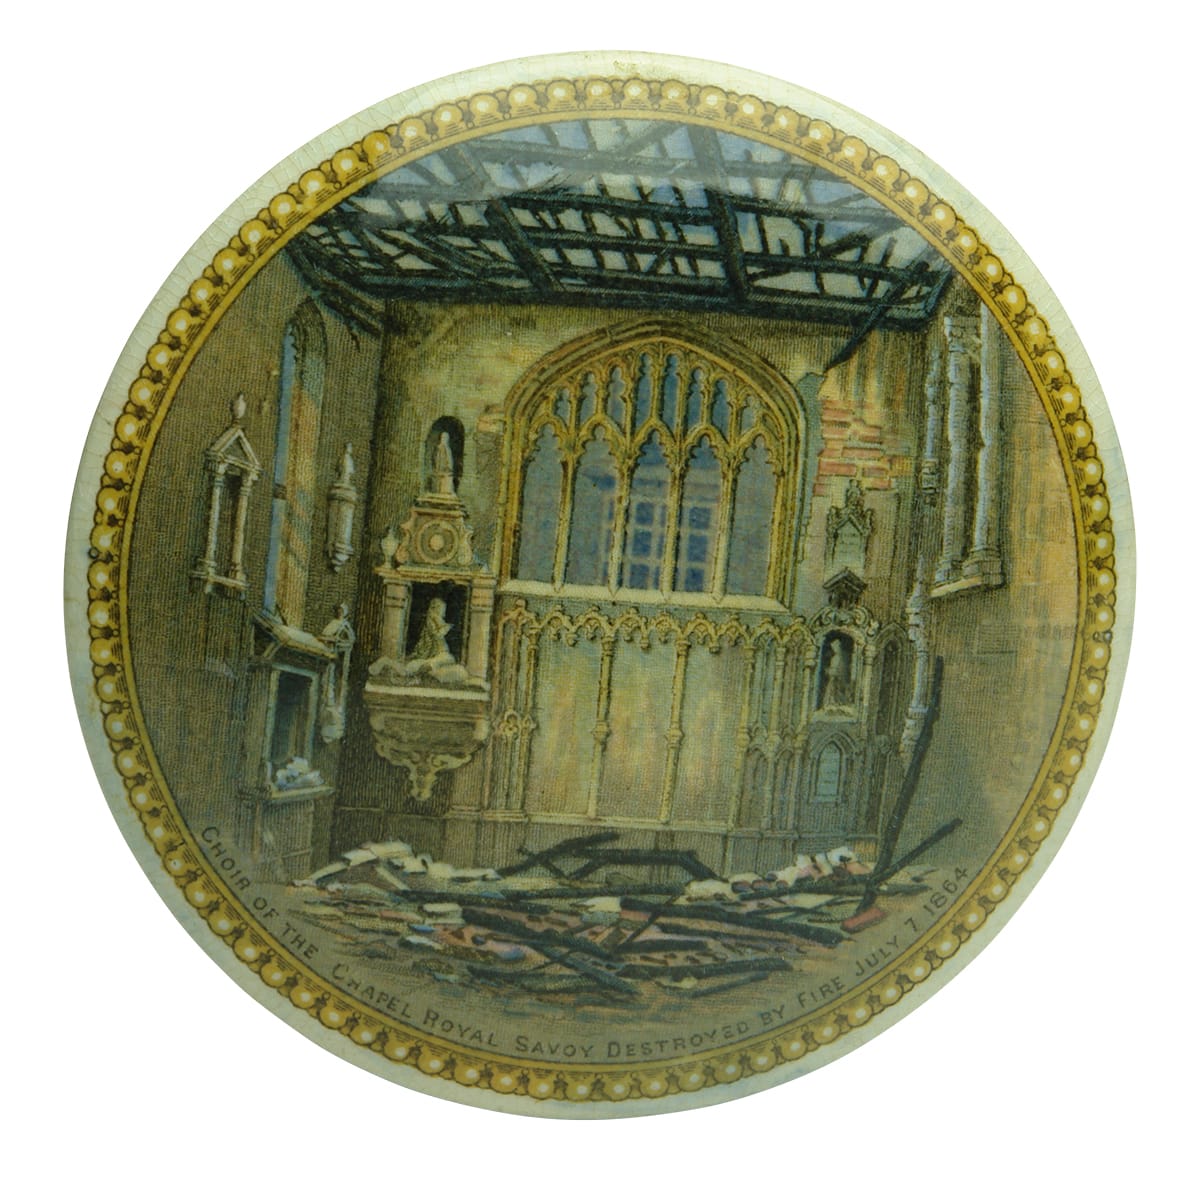 Prattware Pot Lid.  Choir of the Chapel Royal Savoy destroyed by fire July 7 1864.